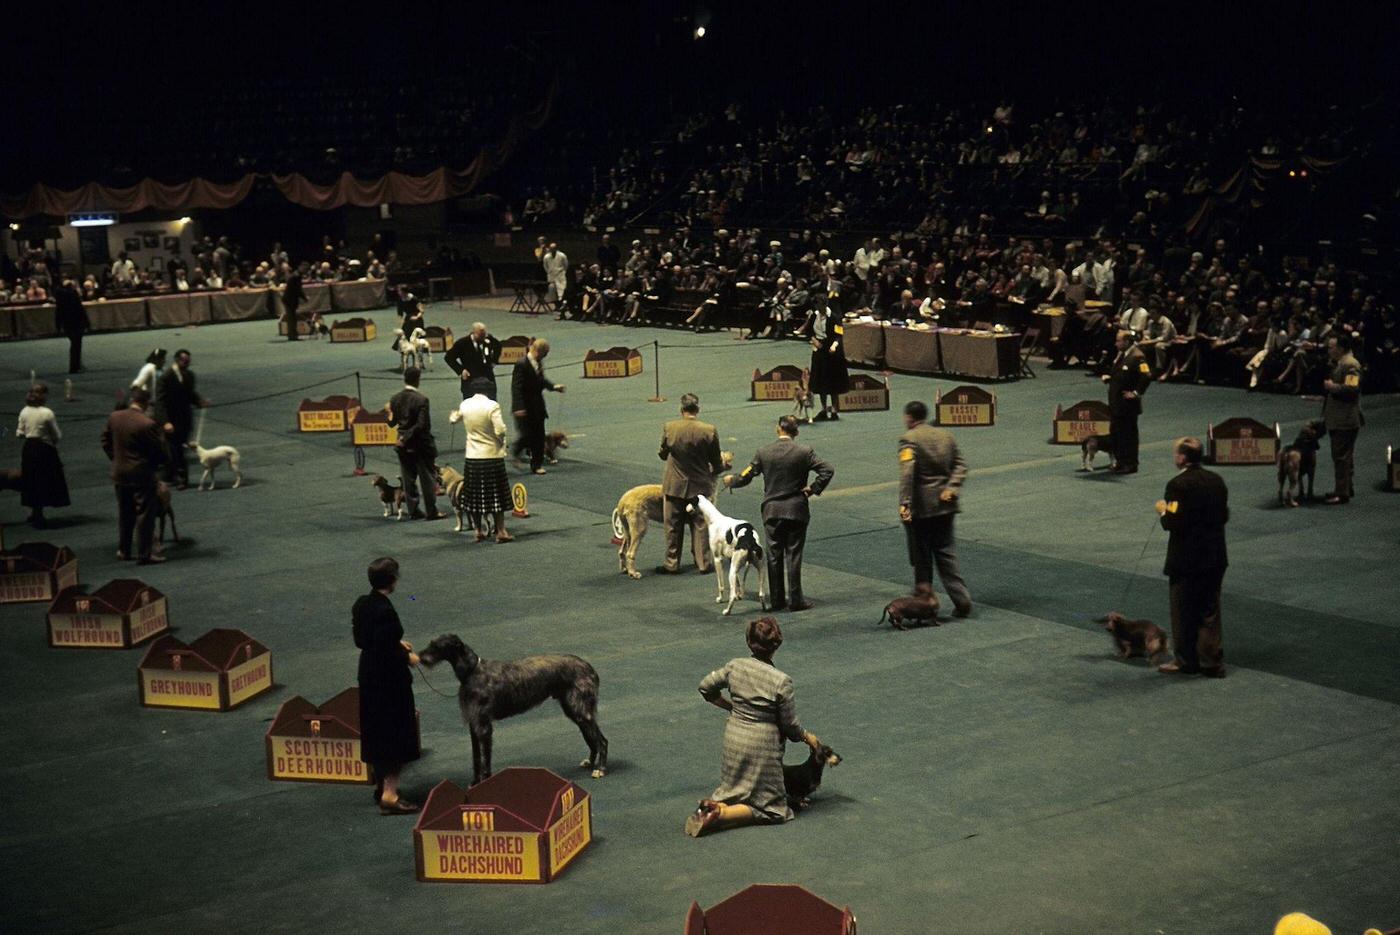 View Of The Hound Group At Westminster Kennel Club Dog Show, Madison Square Garden, Manhattan, 1957.